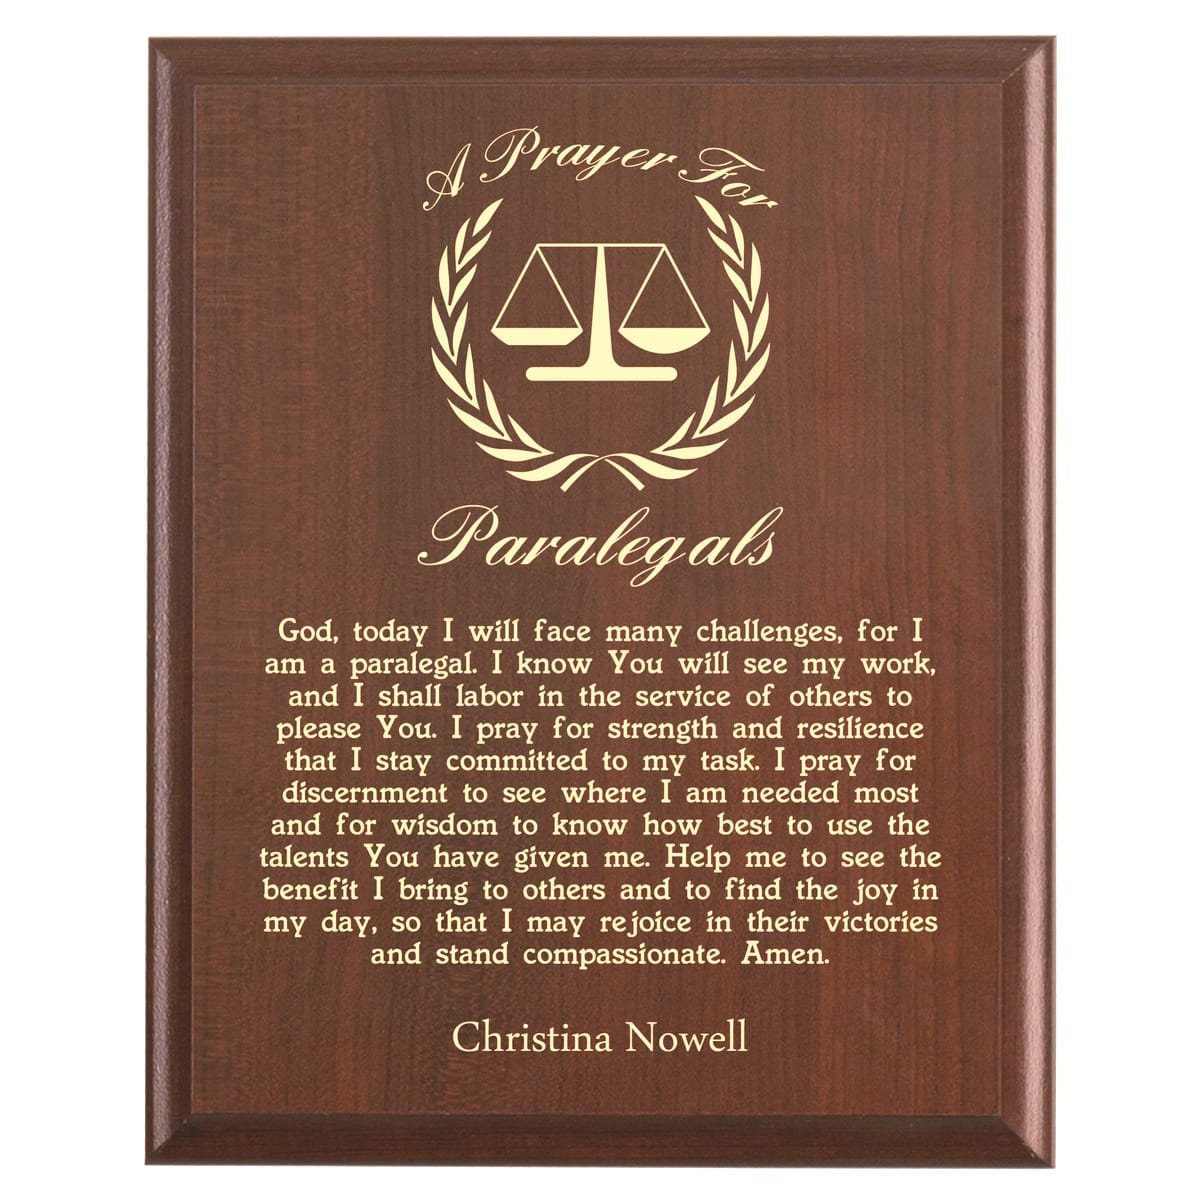 Plaque photo: Paralegal Prayer Plaque design with free personalization. Wood style finish with customized text.